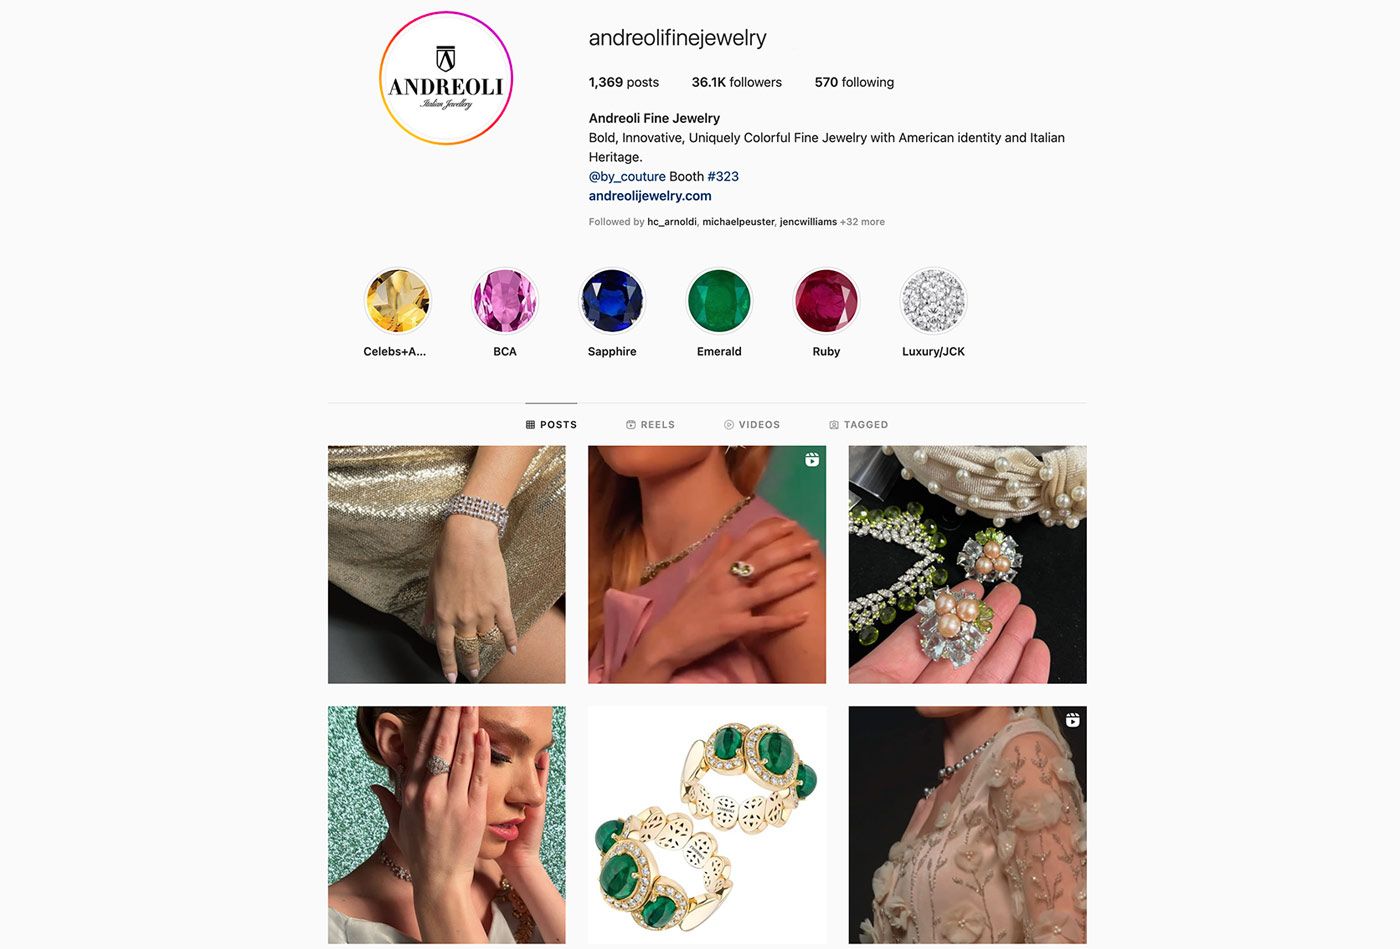 Discover Andreoli on Instagram